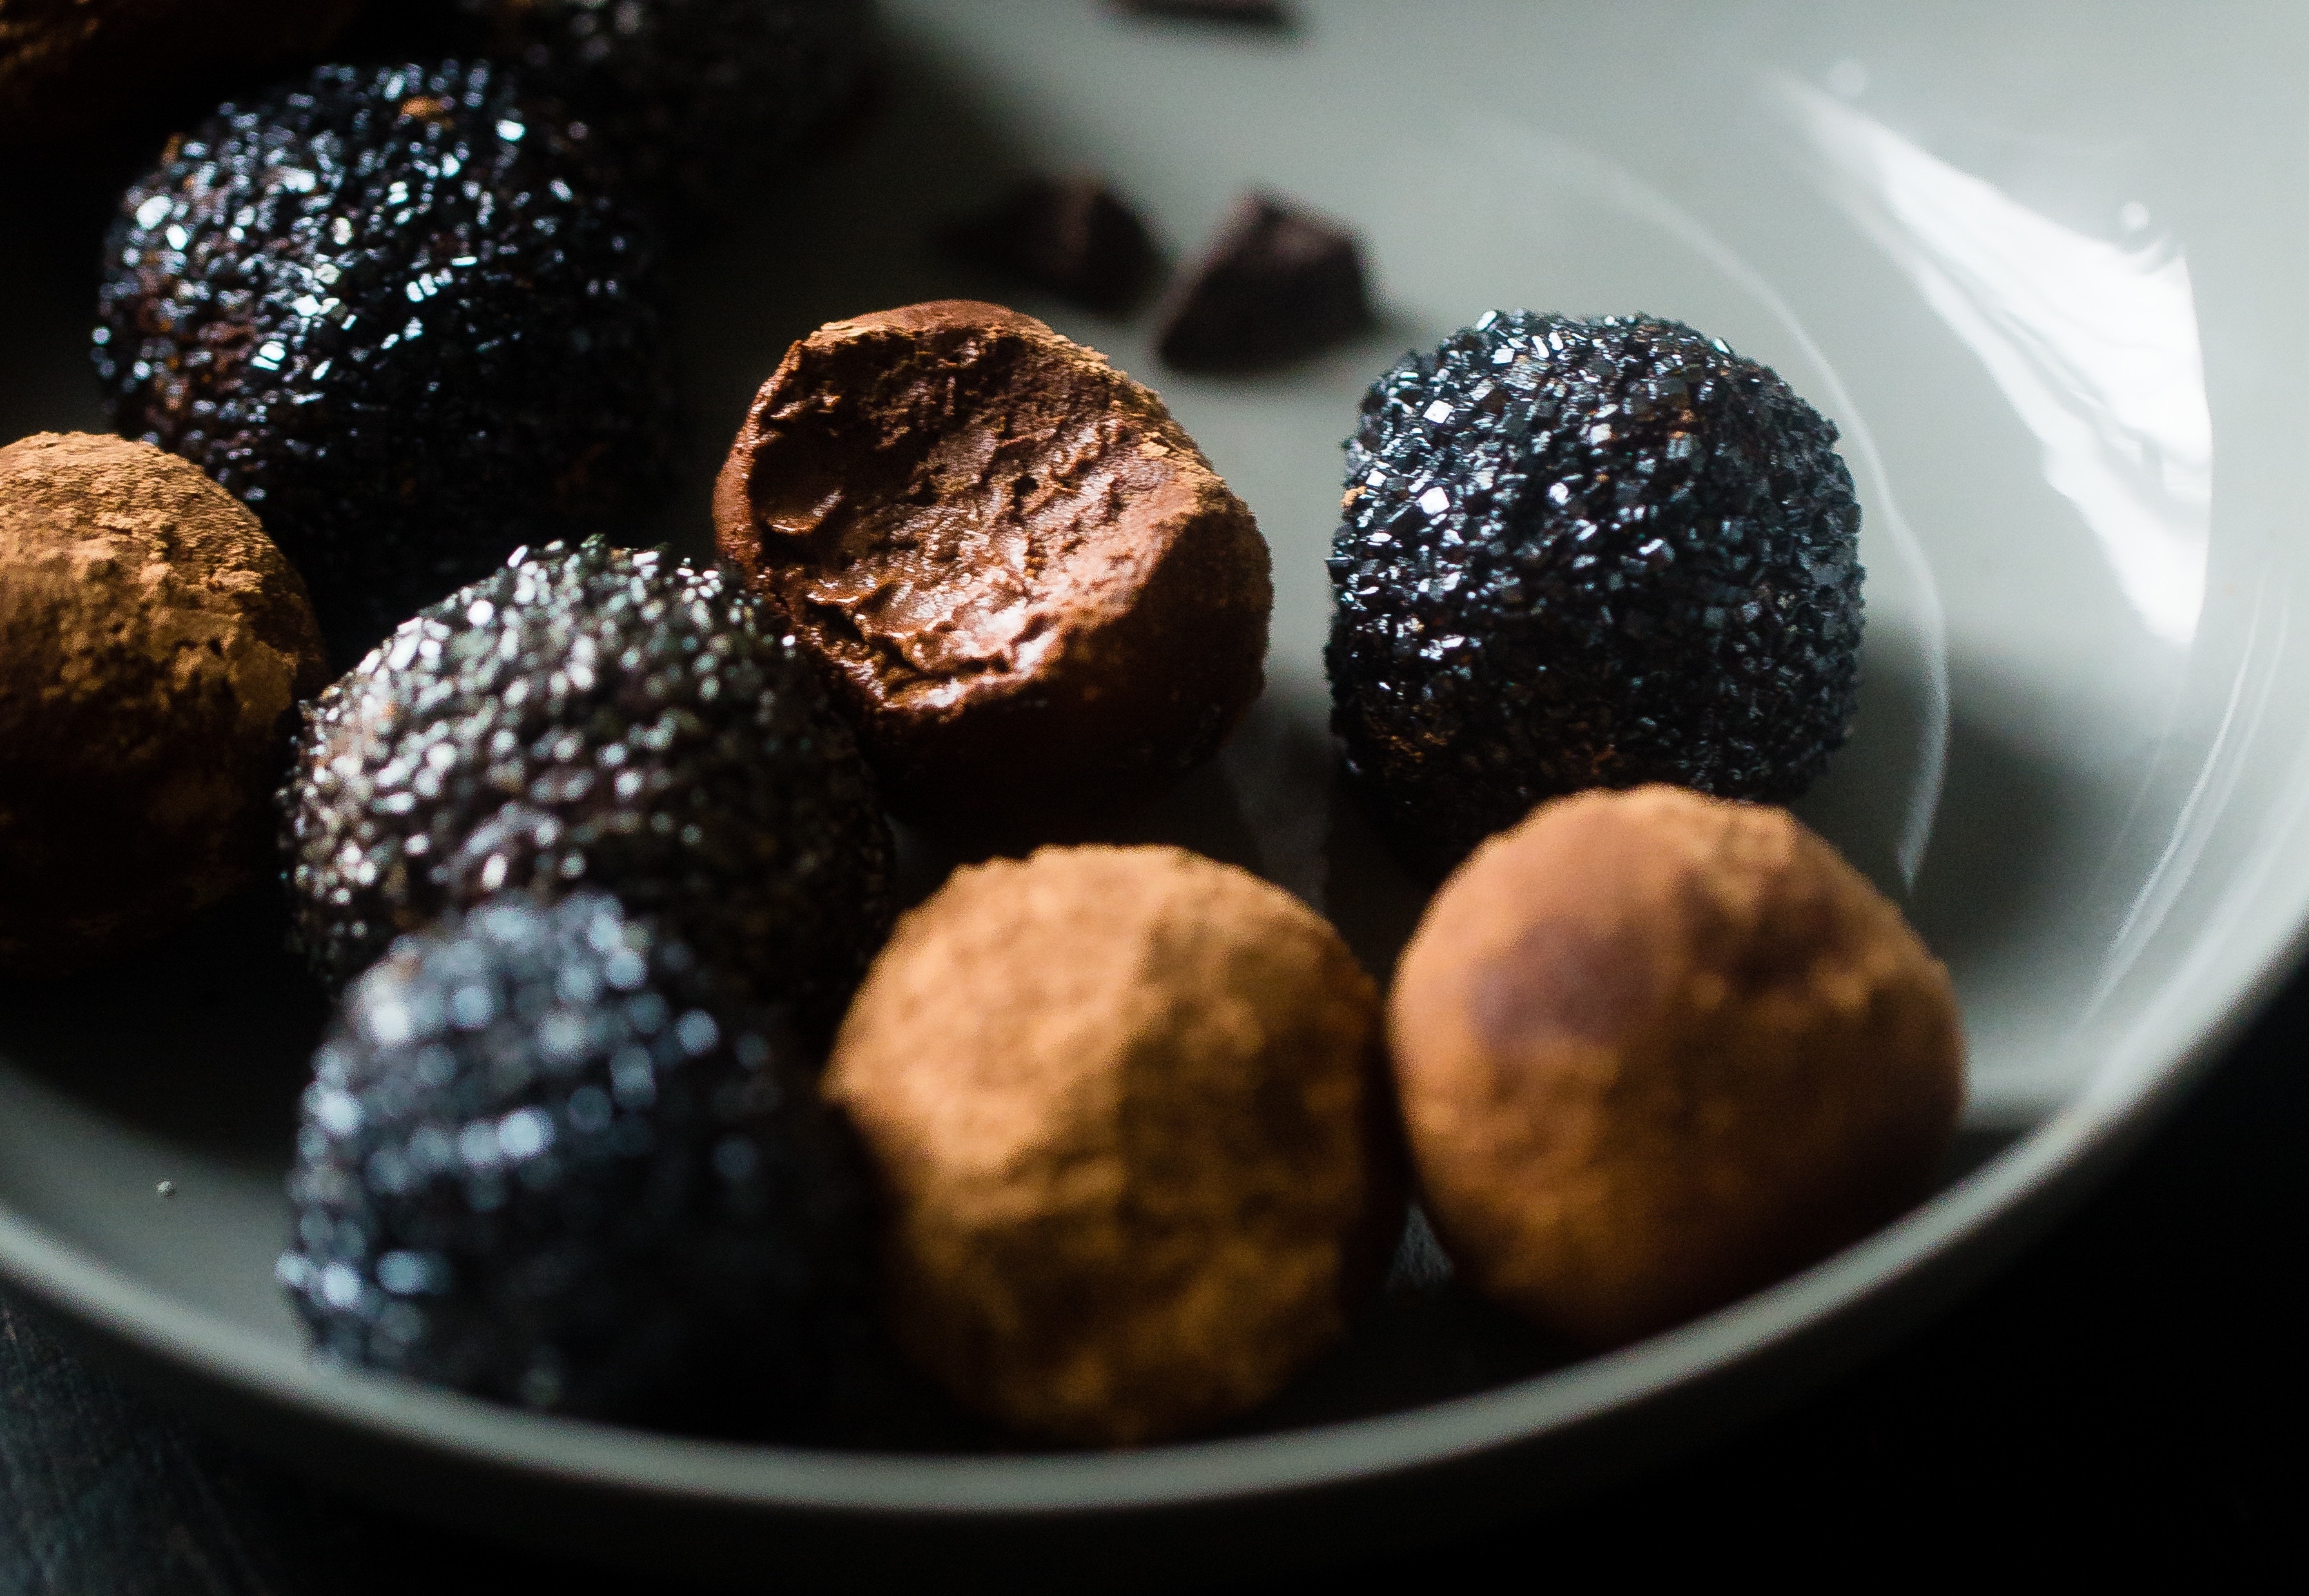 Travel Noire Eats And Recipes: Quick Chocolate Truffles